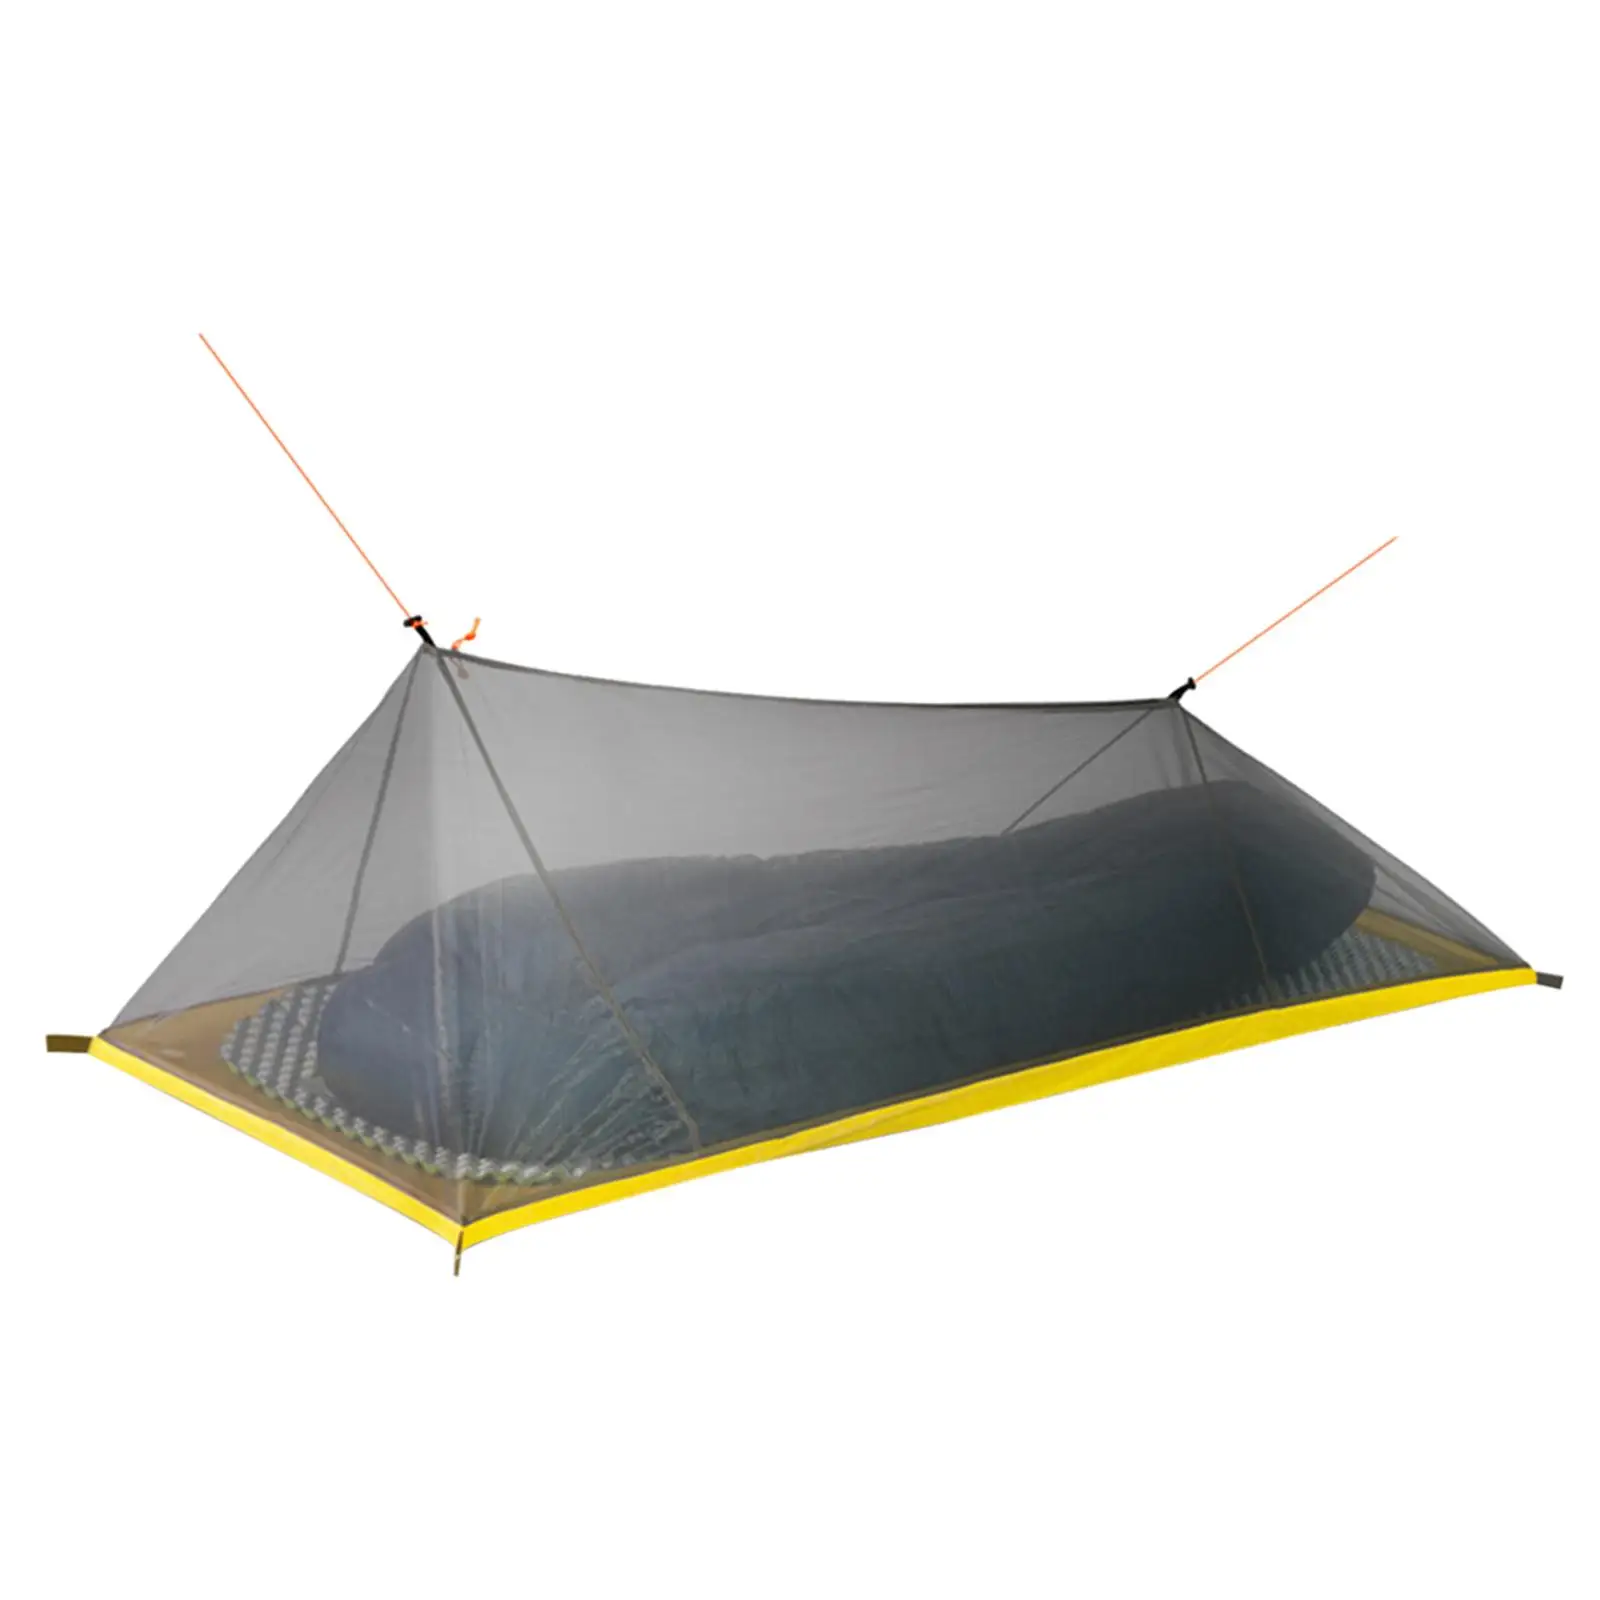 Camping Tent Lightweight with Storage Bag Single Layer Rainproof Windproof Tent for Climbing Outdoors Yard Travel Camping